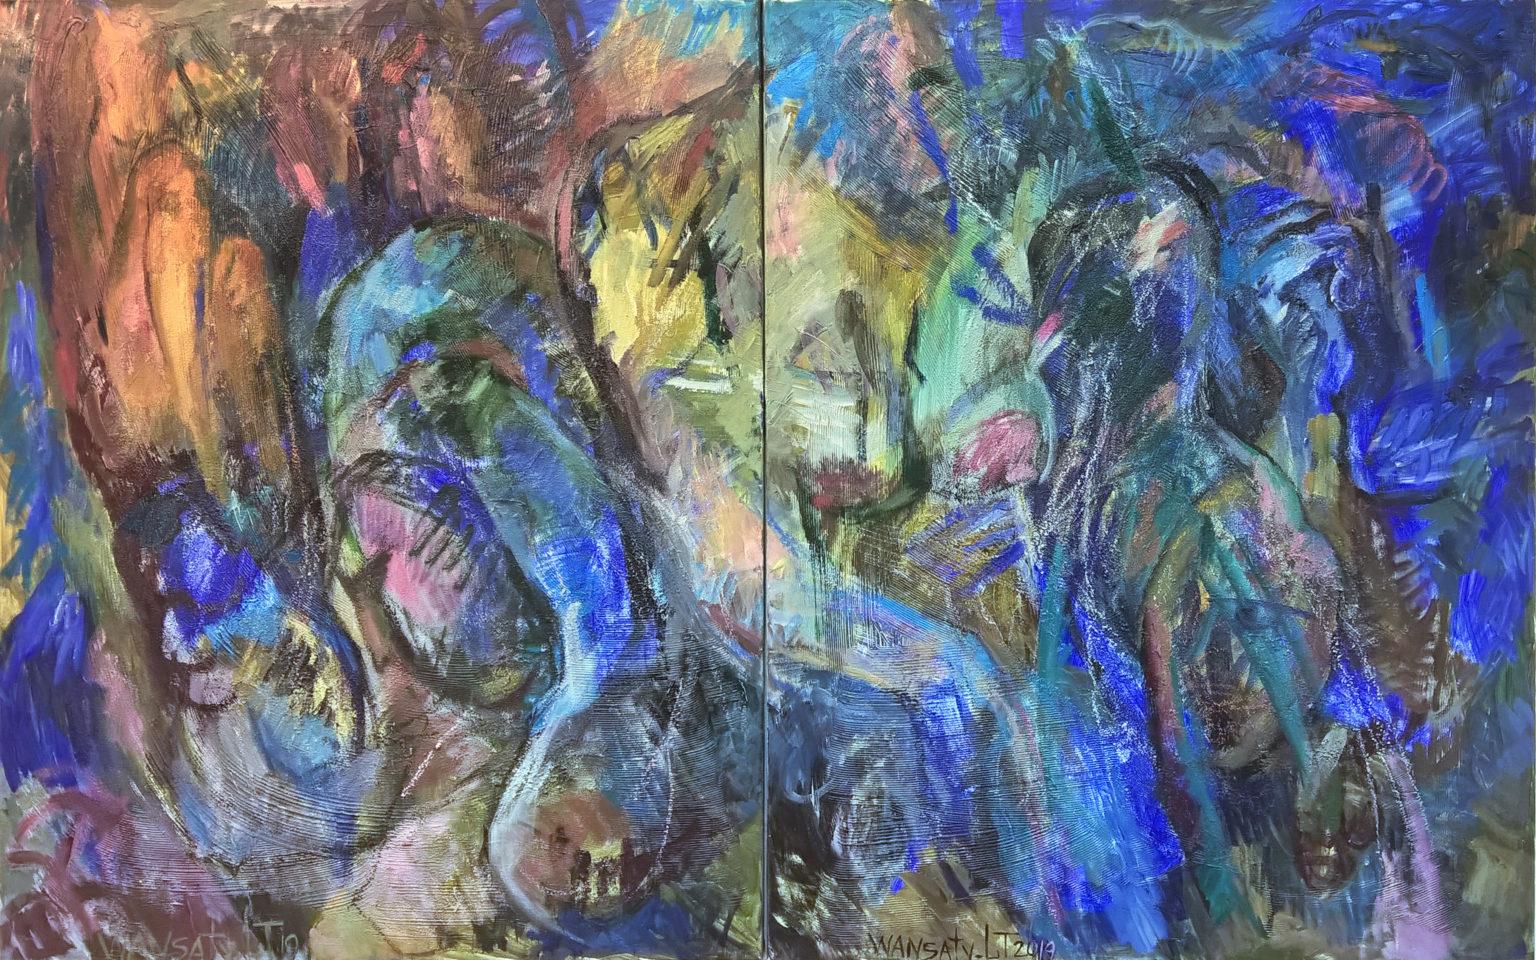 Diptych “Interaction”, 100x160cm - Neo-Expressionist Painting by Tatiana Levchenko